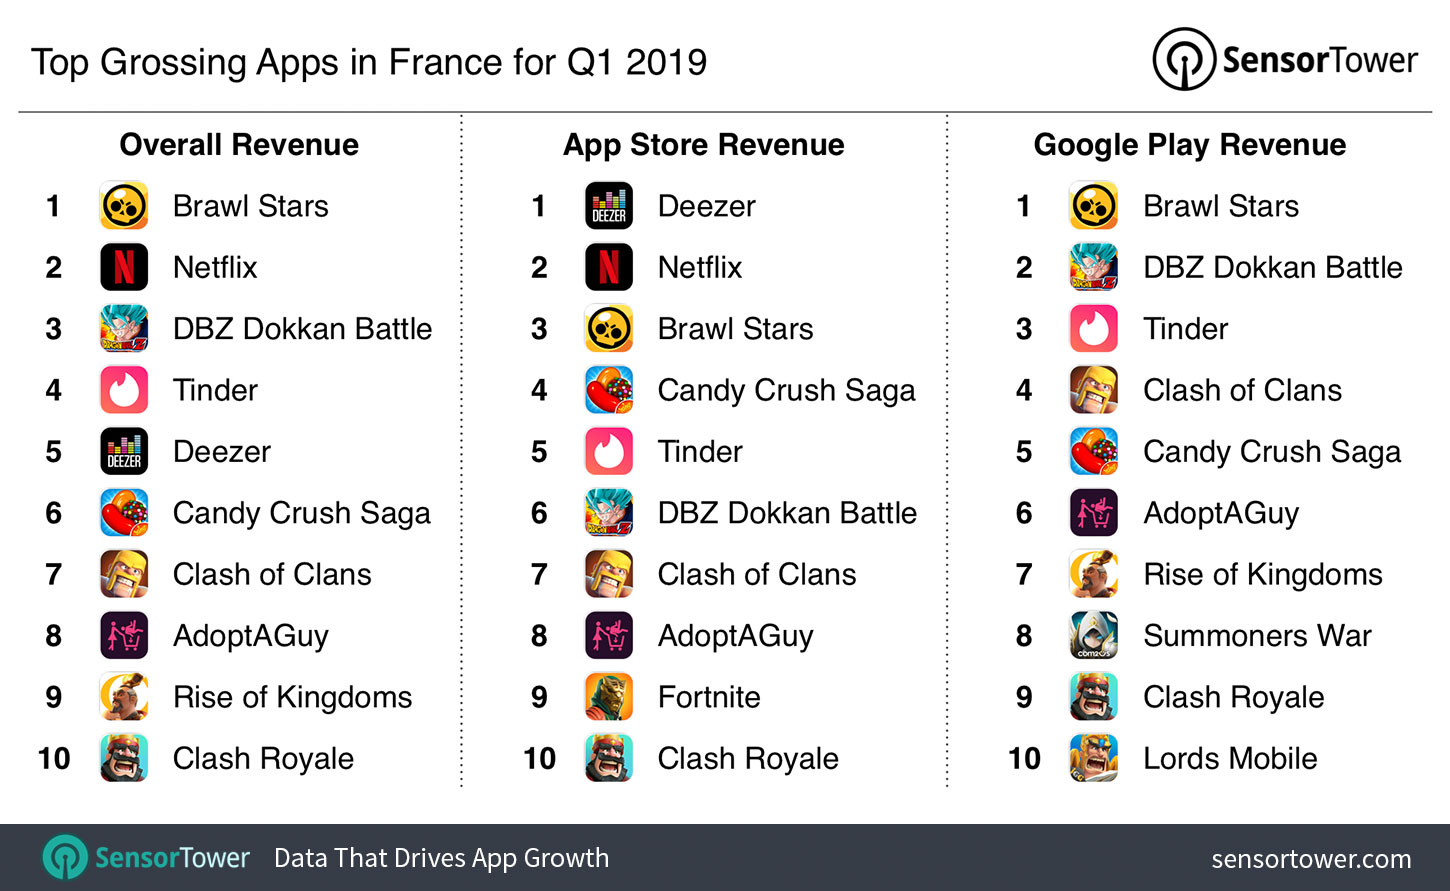 Top Grossing Apps in France for Q1 2019